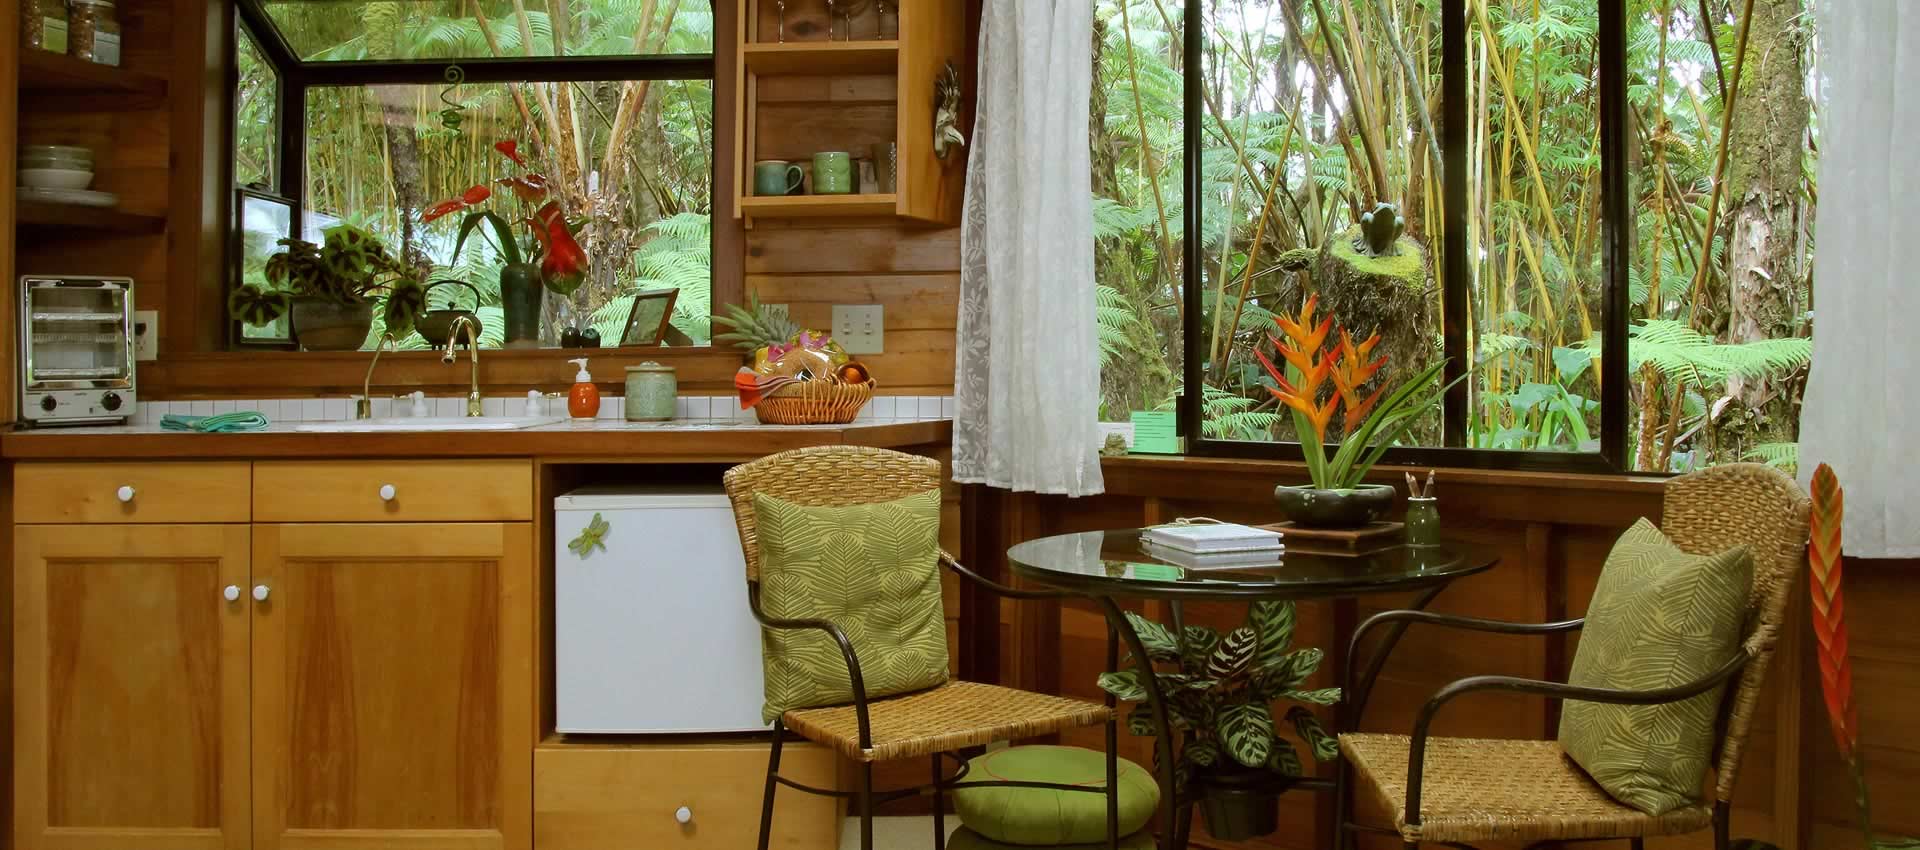 Forest House kitchenette with small refrigerator